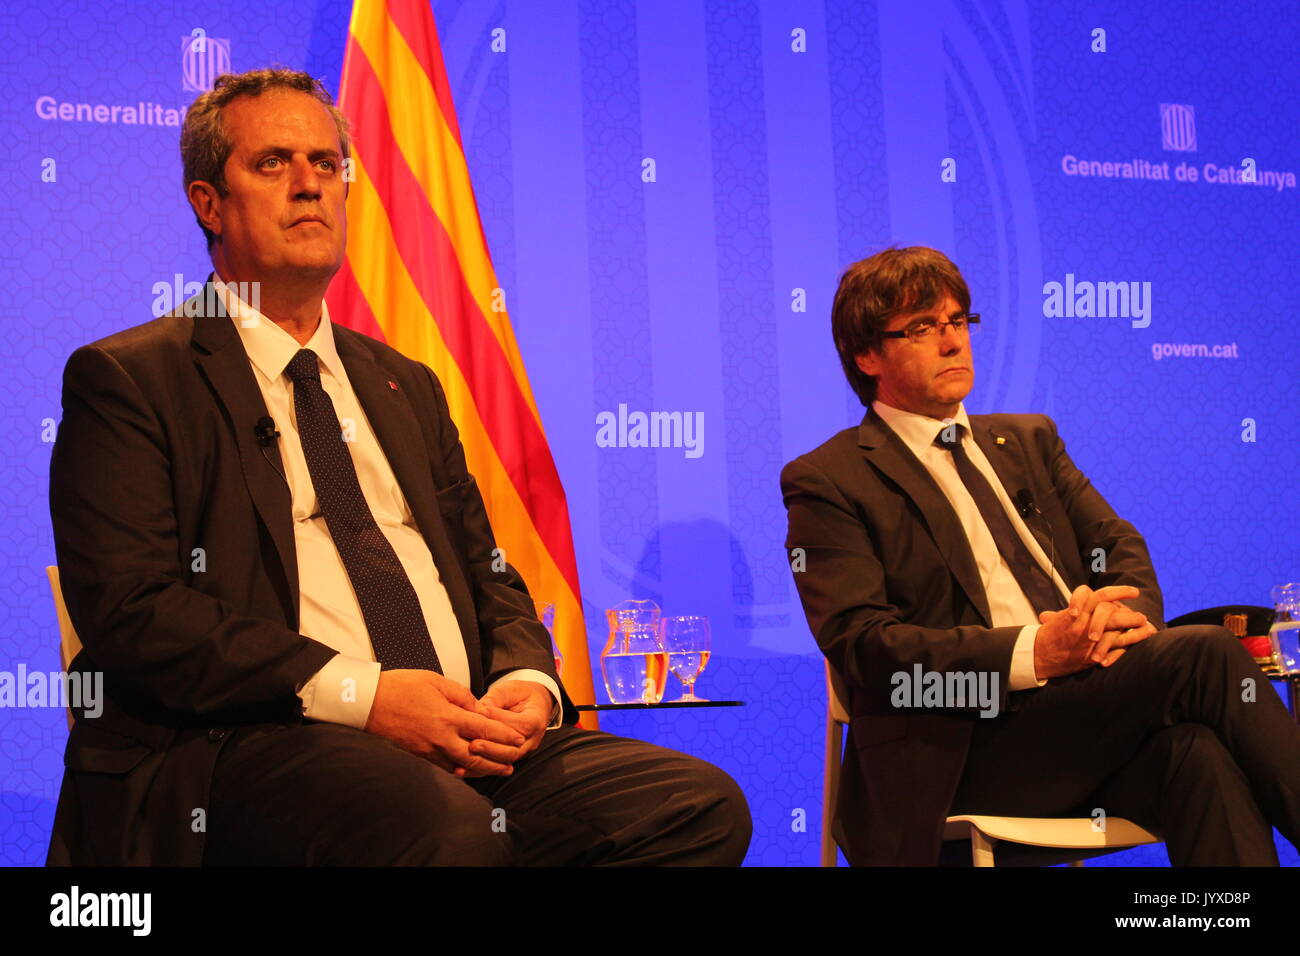 Barcelona, Spain. 20th Aug, 2017. President of the goverment of Catalonia Carles Puigdemont, catalan minister of interior affairs Joaquim Forn and major of the catalan police Josep Lluis Trapero giving details of the terroristic attack on Ramblas during a conference with foreign press at Palau de la Generalitat Credit: Dino Geromella/Alamy Live News Stock Photo